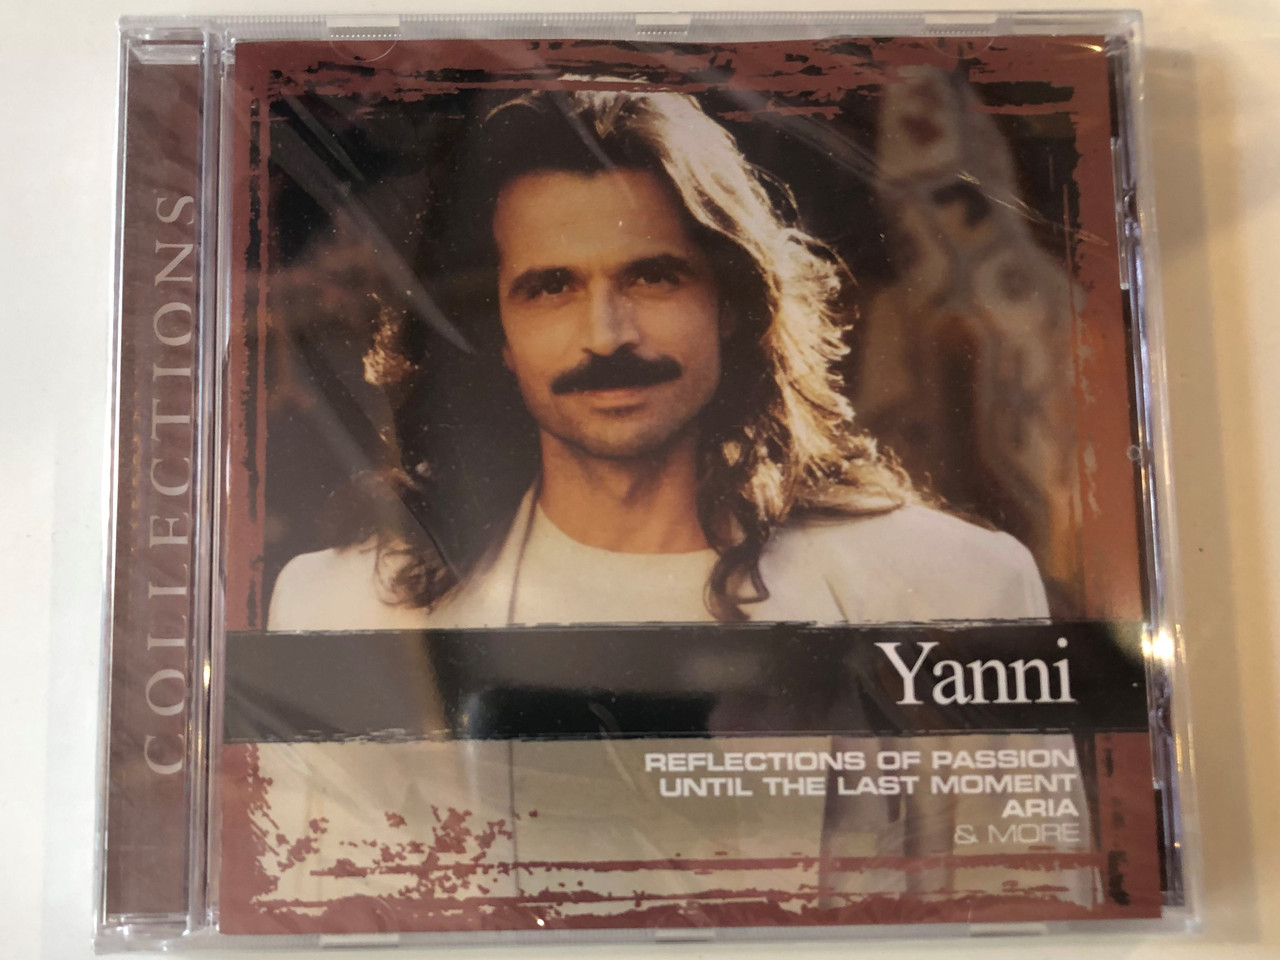 Yanni ‎– Collections / Reflections Of Passion, Until The Last Moment, Aria  & More / Sony BMG Music Entertainment ‎Audio CD 2008 / 88697252752 -  bibleinmylanguage